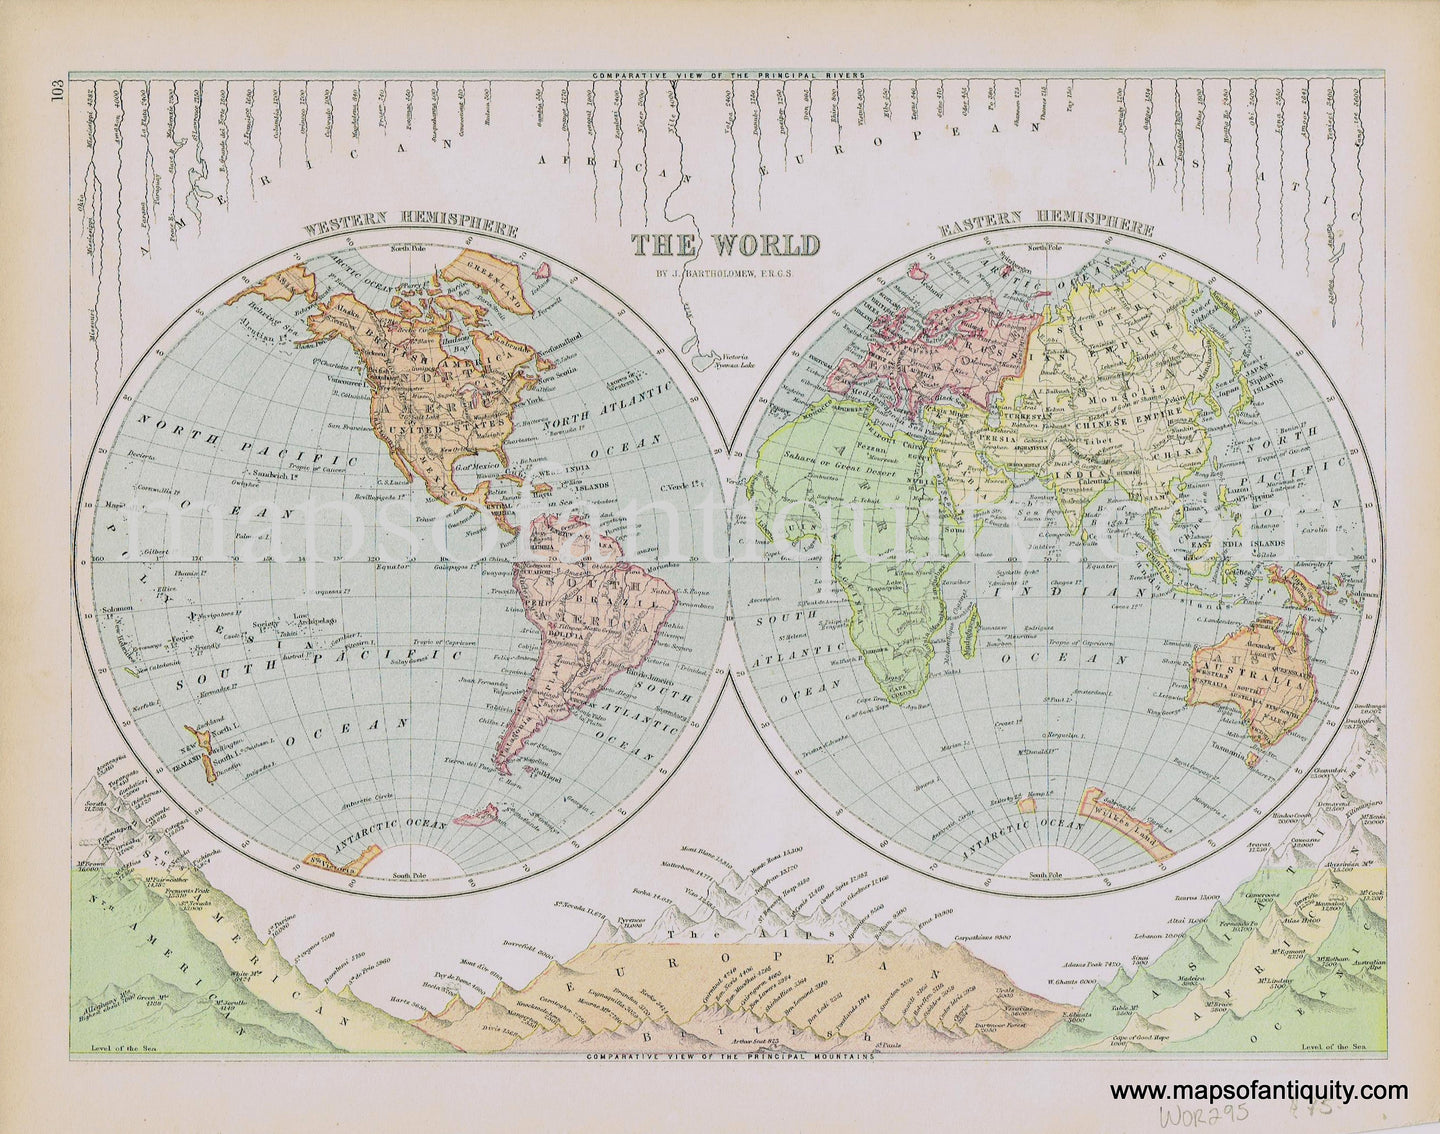 Antique-Printed-Color-Map-The-World-Verso:-Physical-Map-of-Europe-Weller-Bartholomew-1800s-19th-century-Maps-of-Antiquity